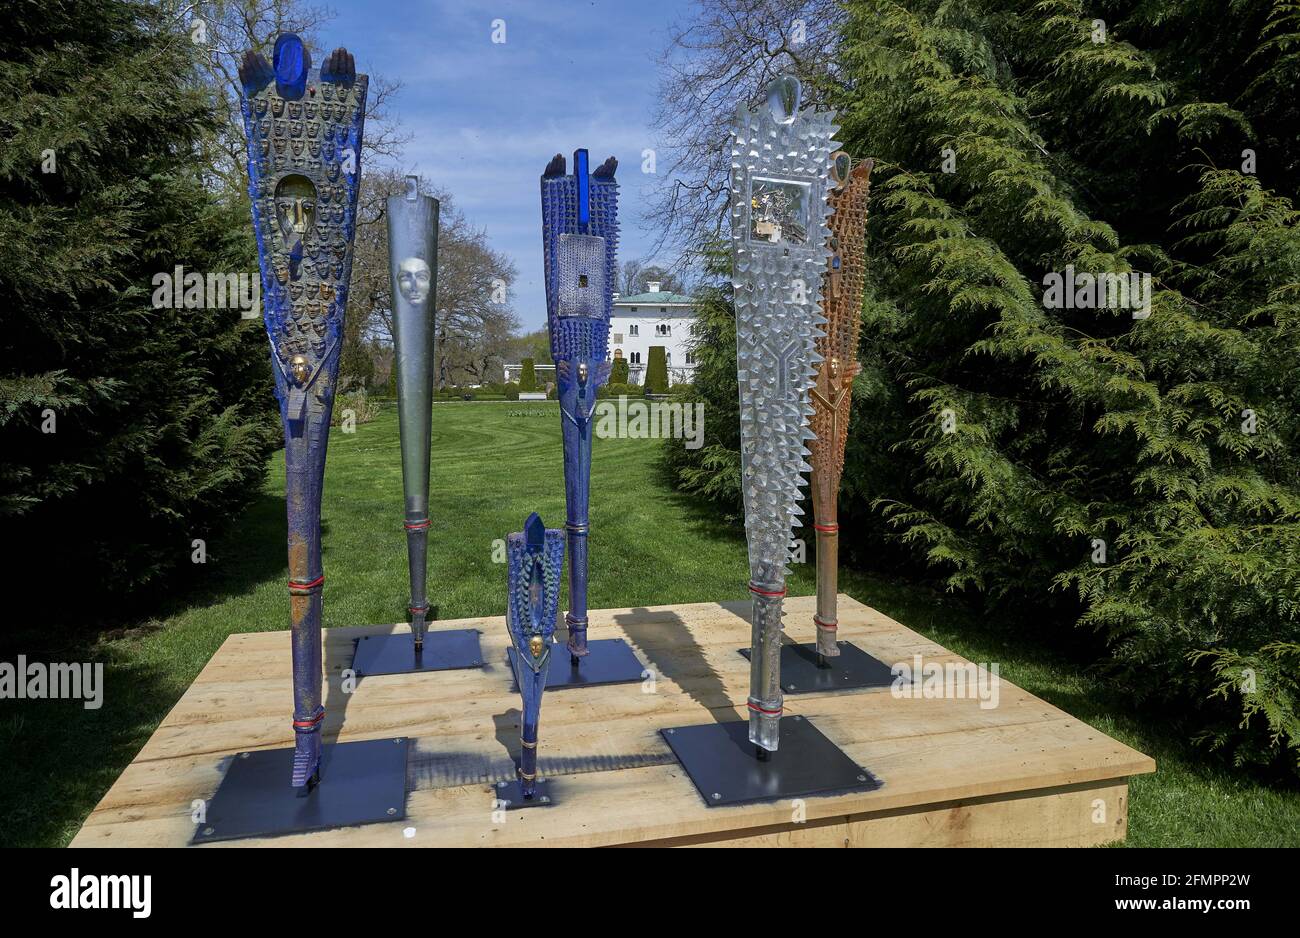 King Carl XVI Gustaf inaugurates 'Gatekeeper' exhibition by world-renowned  glass artists Bertil Vallien. The unique glass exhibition is an open air  exhibition and is shown outdoors in the English Park, part of